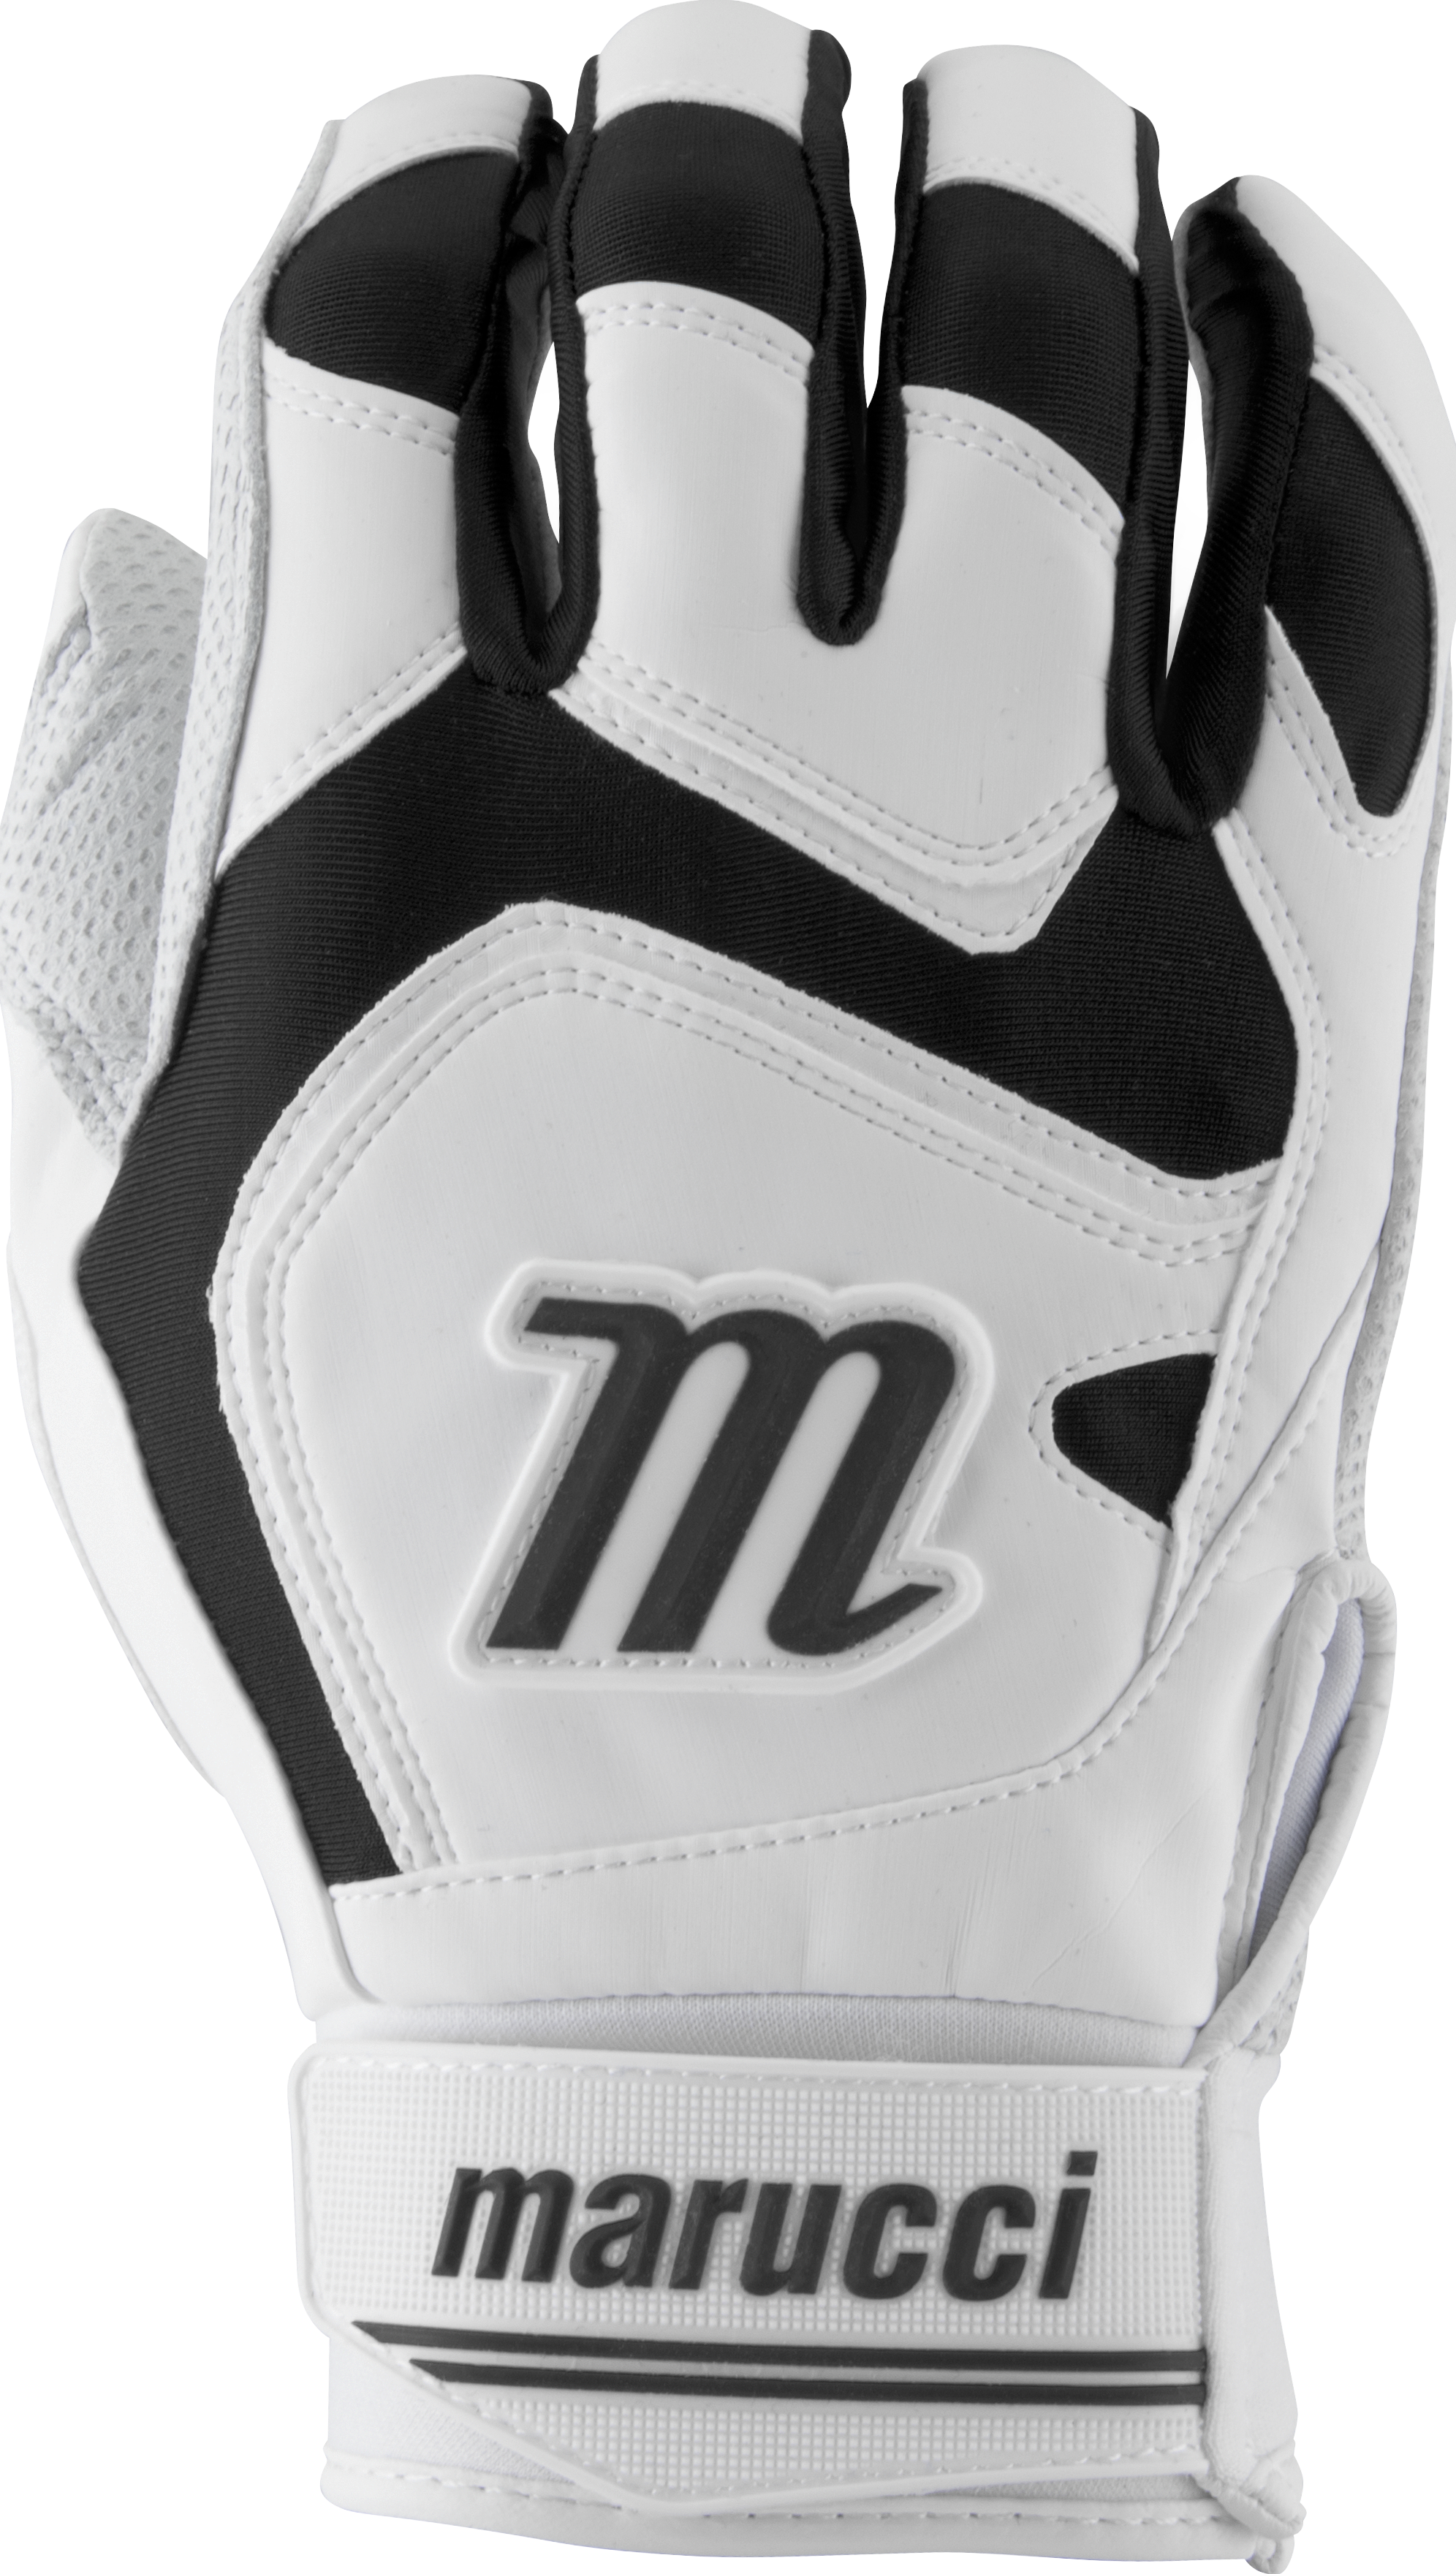 marucci-signature-batting-gloves-mbgsgn2-1-pair-white-black-adult-medium MBGSGN2-WBK-AM Marucci 849817096598 2019 Model MBGSGN2-W/BK-AS Consistency And Craftsmanship Commitment To Quality And Understanding